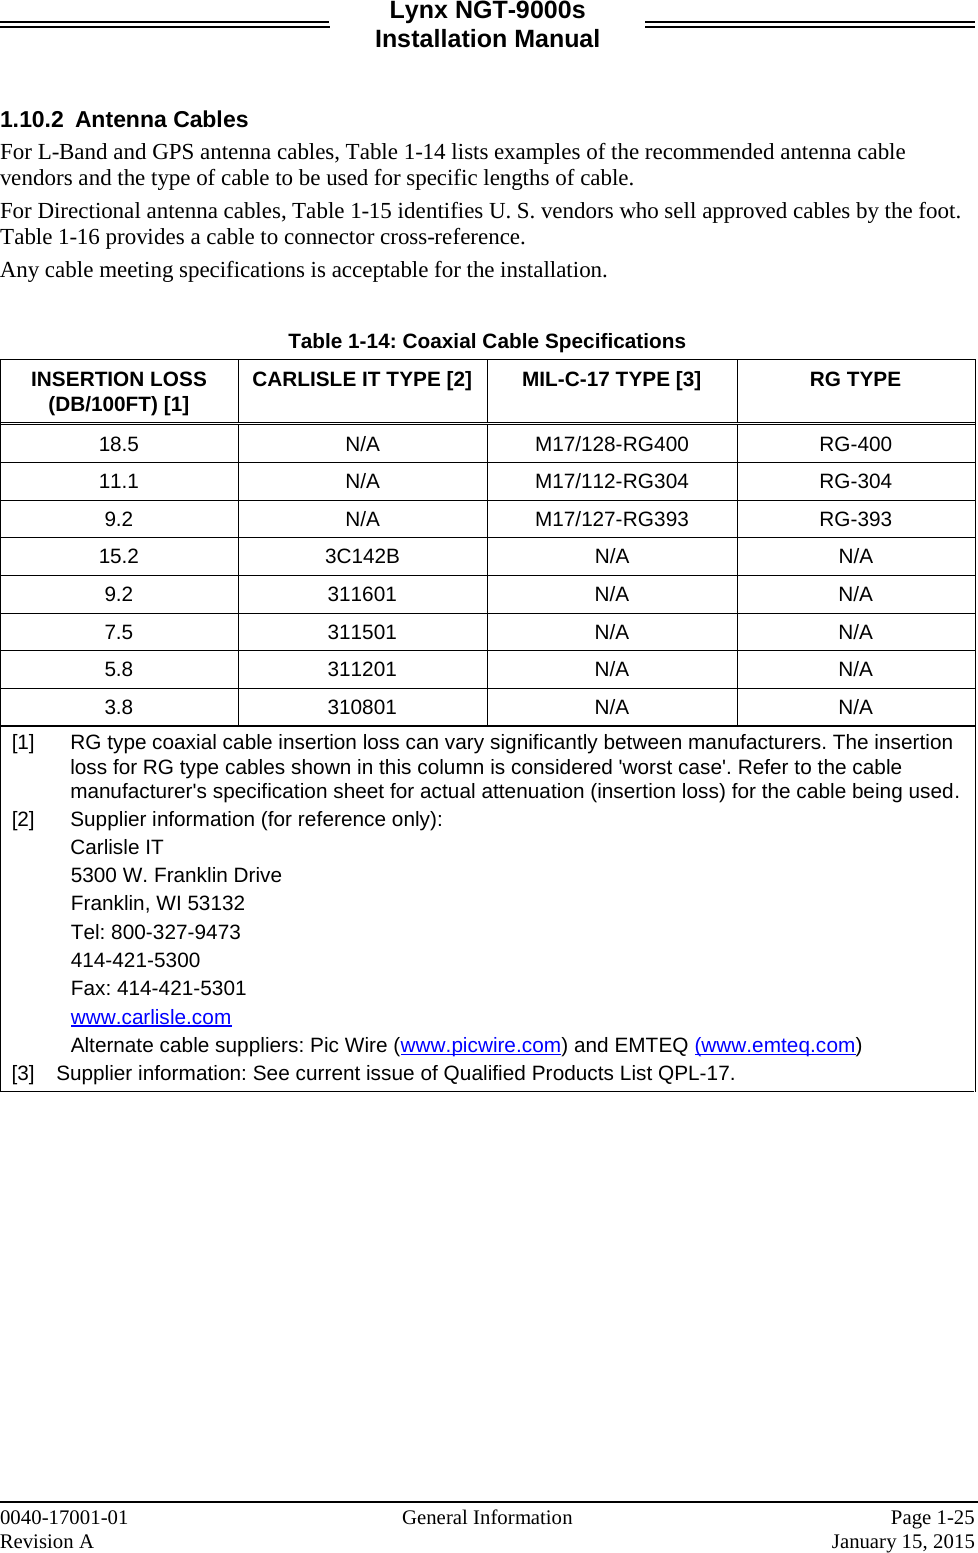 Lynx NGT-9000s Installation Manual   1.10.2 Antenna Cables For L-Band and GPS antenna cables, Table 1-14 lists examples of the recommended antenna cable vendors and the type of cable to be used for specific lengths of cable.  For Directional antenna cables, Table 1-15 identifies U. S. vendors who sell approved cables by the foot. Table 1-16 provides a cable to connector cross-reference. Any cable meeting specifications is acceptable for the installation.  Table 1-14: Coaxial Cable Specifications INSERTION LOSS (DB/100FT) [1] CARLISLE IT TYPE [2] MIL-C-17 TYPE [3] RG TYPE 18.5 N/A M17/128-RG400 RG-400 11.1 N/A M17/112-RG304 RG-304 9.2 N/A M17/127-RG393 RG-393 15.2 3C142B N/A N/A 9.2 311601 N/A N/A 7.5 311501 N/A N/A 5.8 311201 N/A N/A 3.8 310801 N/A N/A [1]     RG type coaxial cable insertion loss can vary significantly between manufacturers. The insertion loss for RG type cables shown in this column is considered &apos;worst case&apos;. Refer to the cable manufacturer&apos;s specification sheet for actual attenuation (insertion loss) for the cable being used. [2]     Supplier information (for reference only):     Carlisle IT 5300 W. Franklin Drive Franklin, WI 53132 Tel: 800-327-9473 414-421-5300 Fax: 414-421-5301 www.carlisle.com Alternate cable suppliers: Pic Wire (www.picwire.com) and EMTEQ (www.emteq.com) [3]  Supplier information: See current issue of Qualified Products List QPL-17.        0040-17001-01    General Information Page 1-25 Revision A     January 15, 2015 